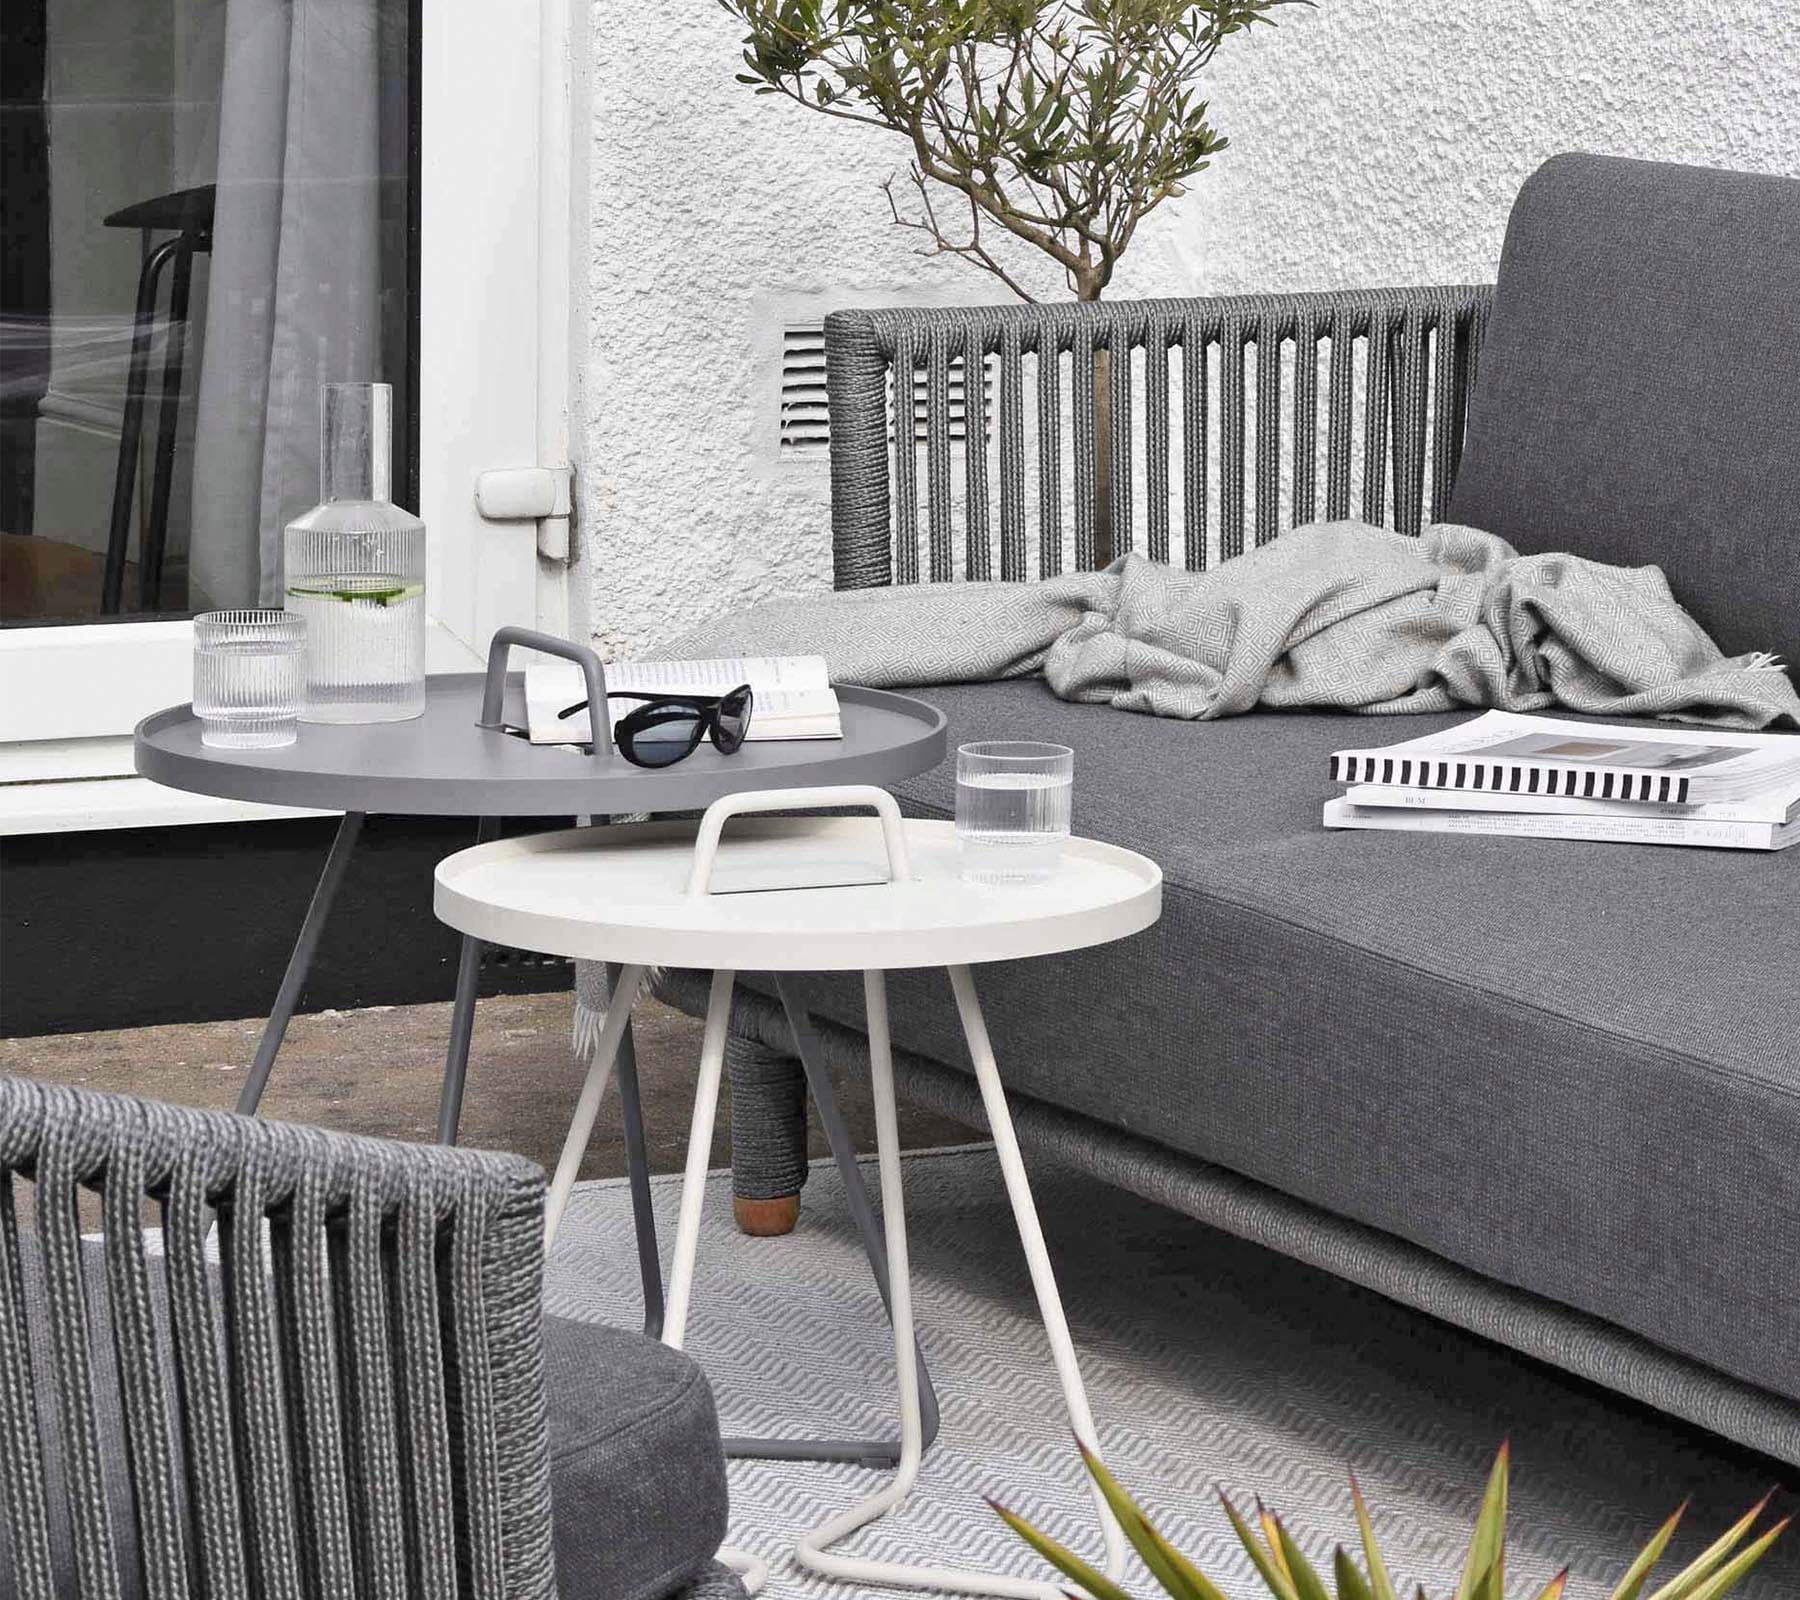 Boxhill's Moments 2-Seater Right Module Sofa lifestyle image at patio with a fabric cloth and books on top, and 2 round table in front 